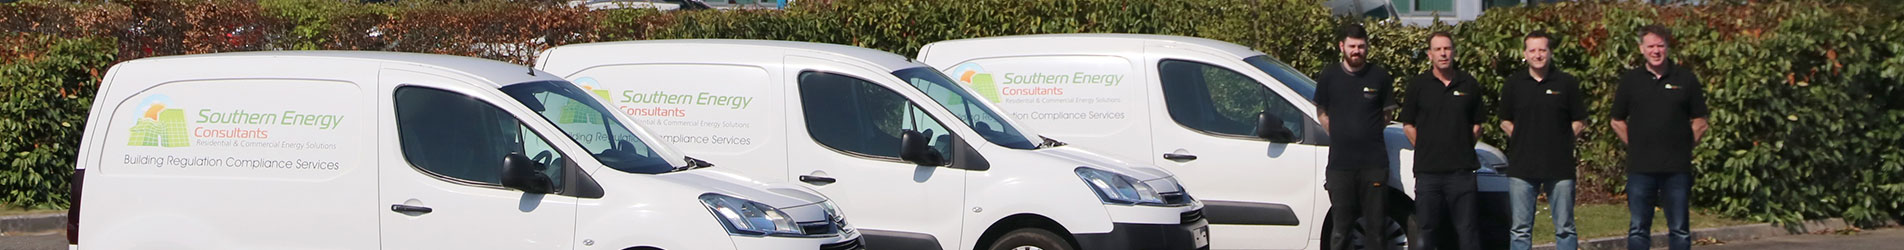 Contact Southern Energy Consultants